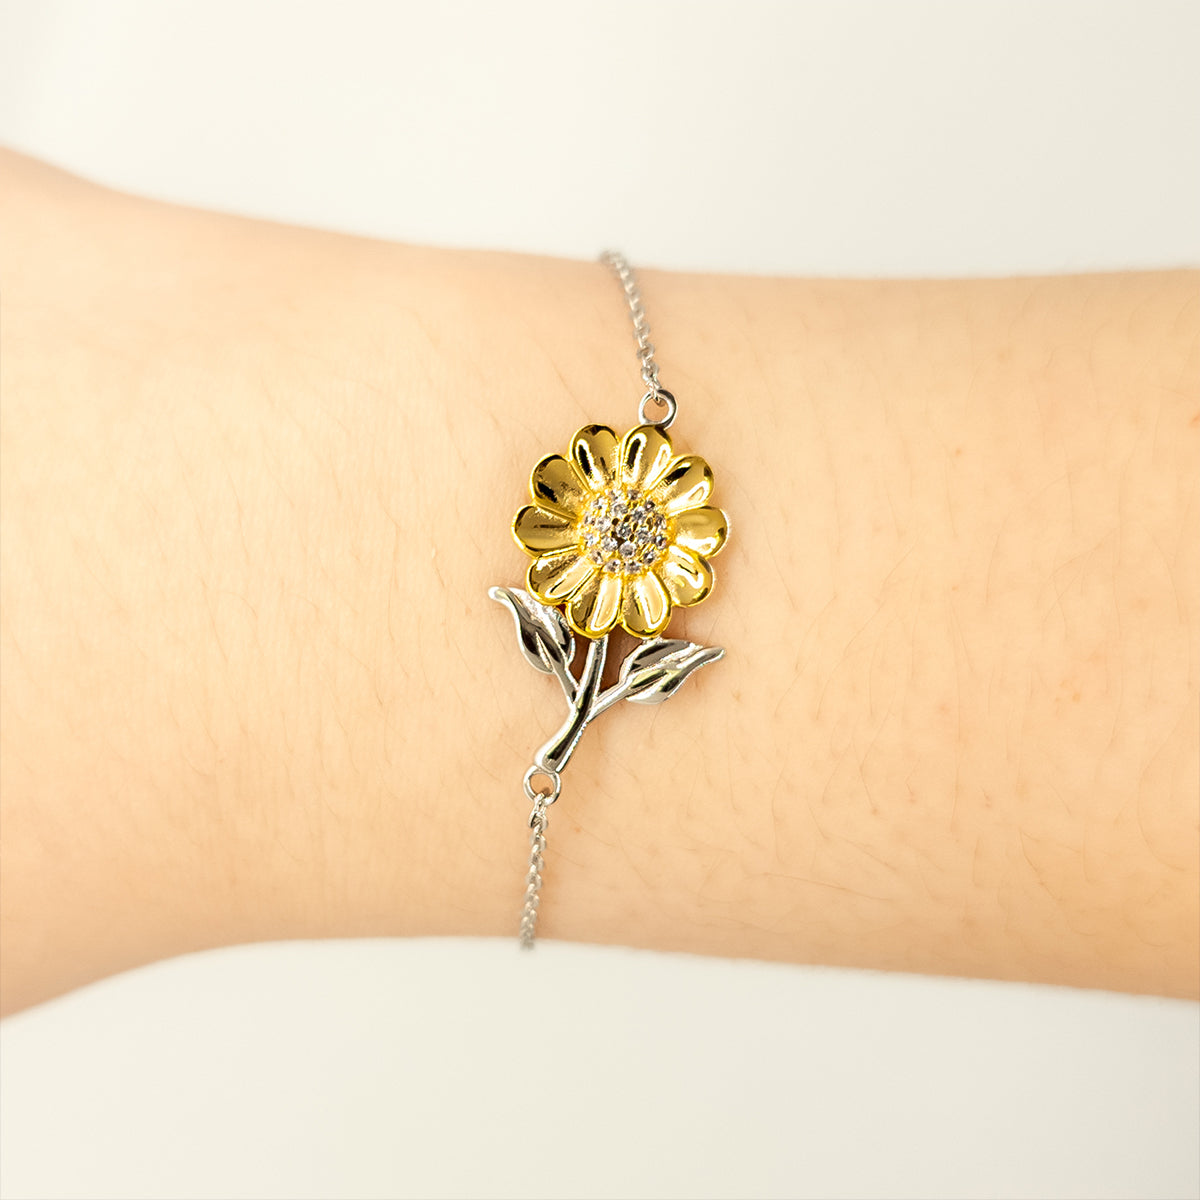 Special Brother Sunflower Bracelet Engraved Inspirational Birthday Gift for Him